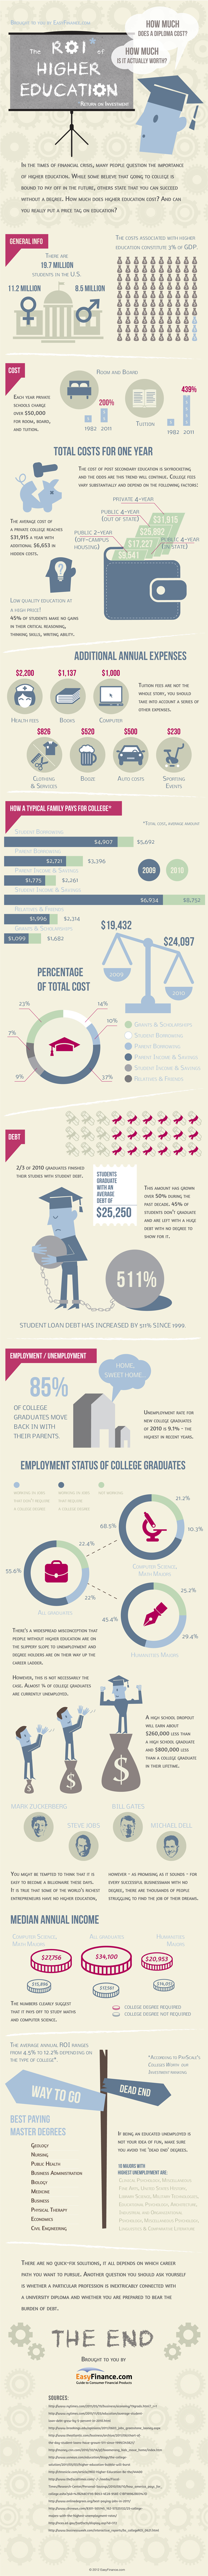 The ROI of Higher Education (Infographic) 